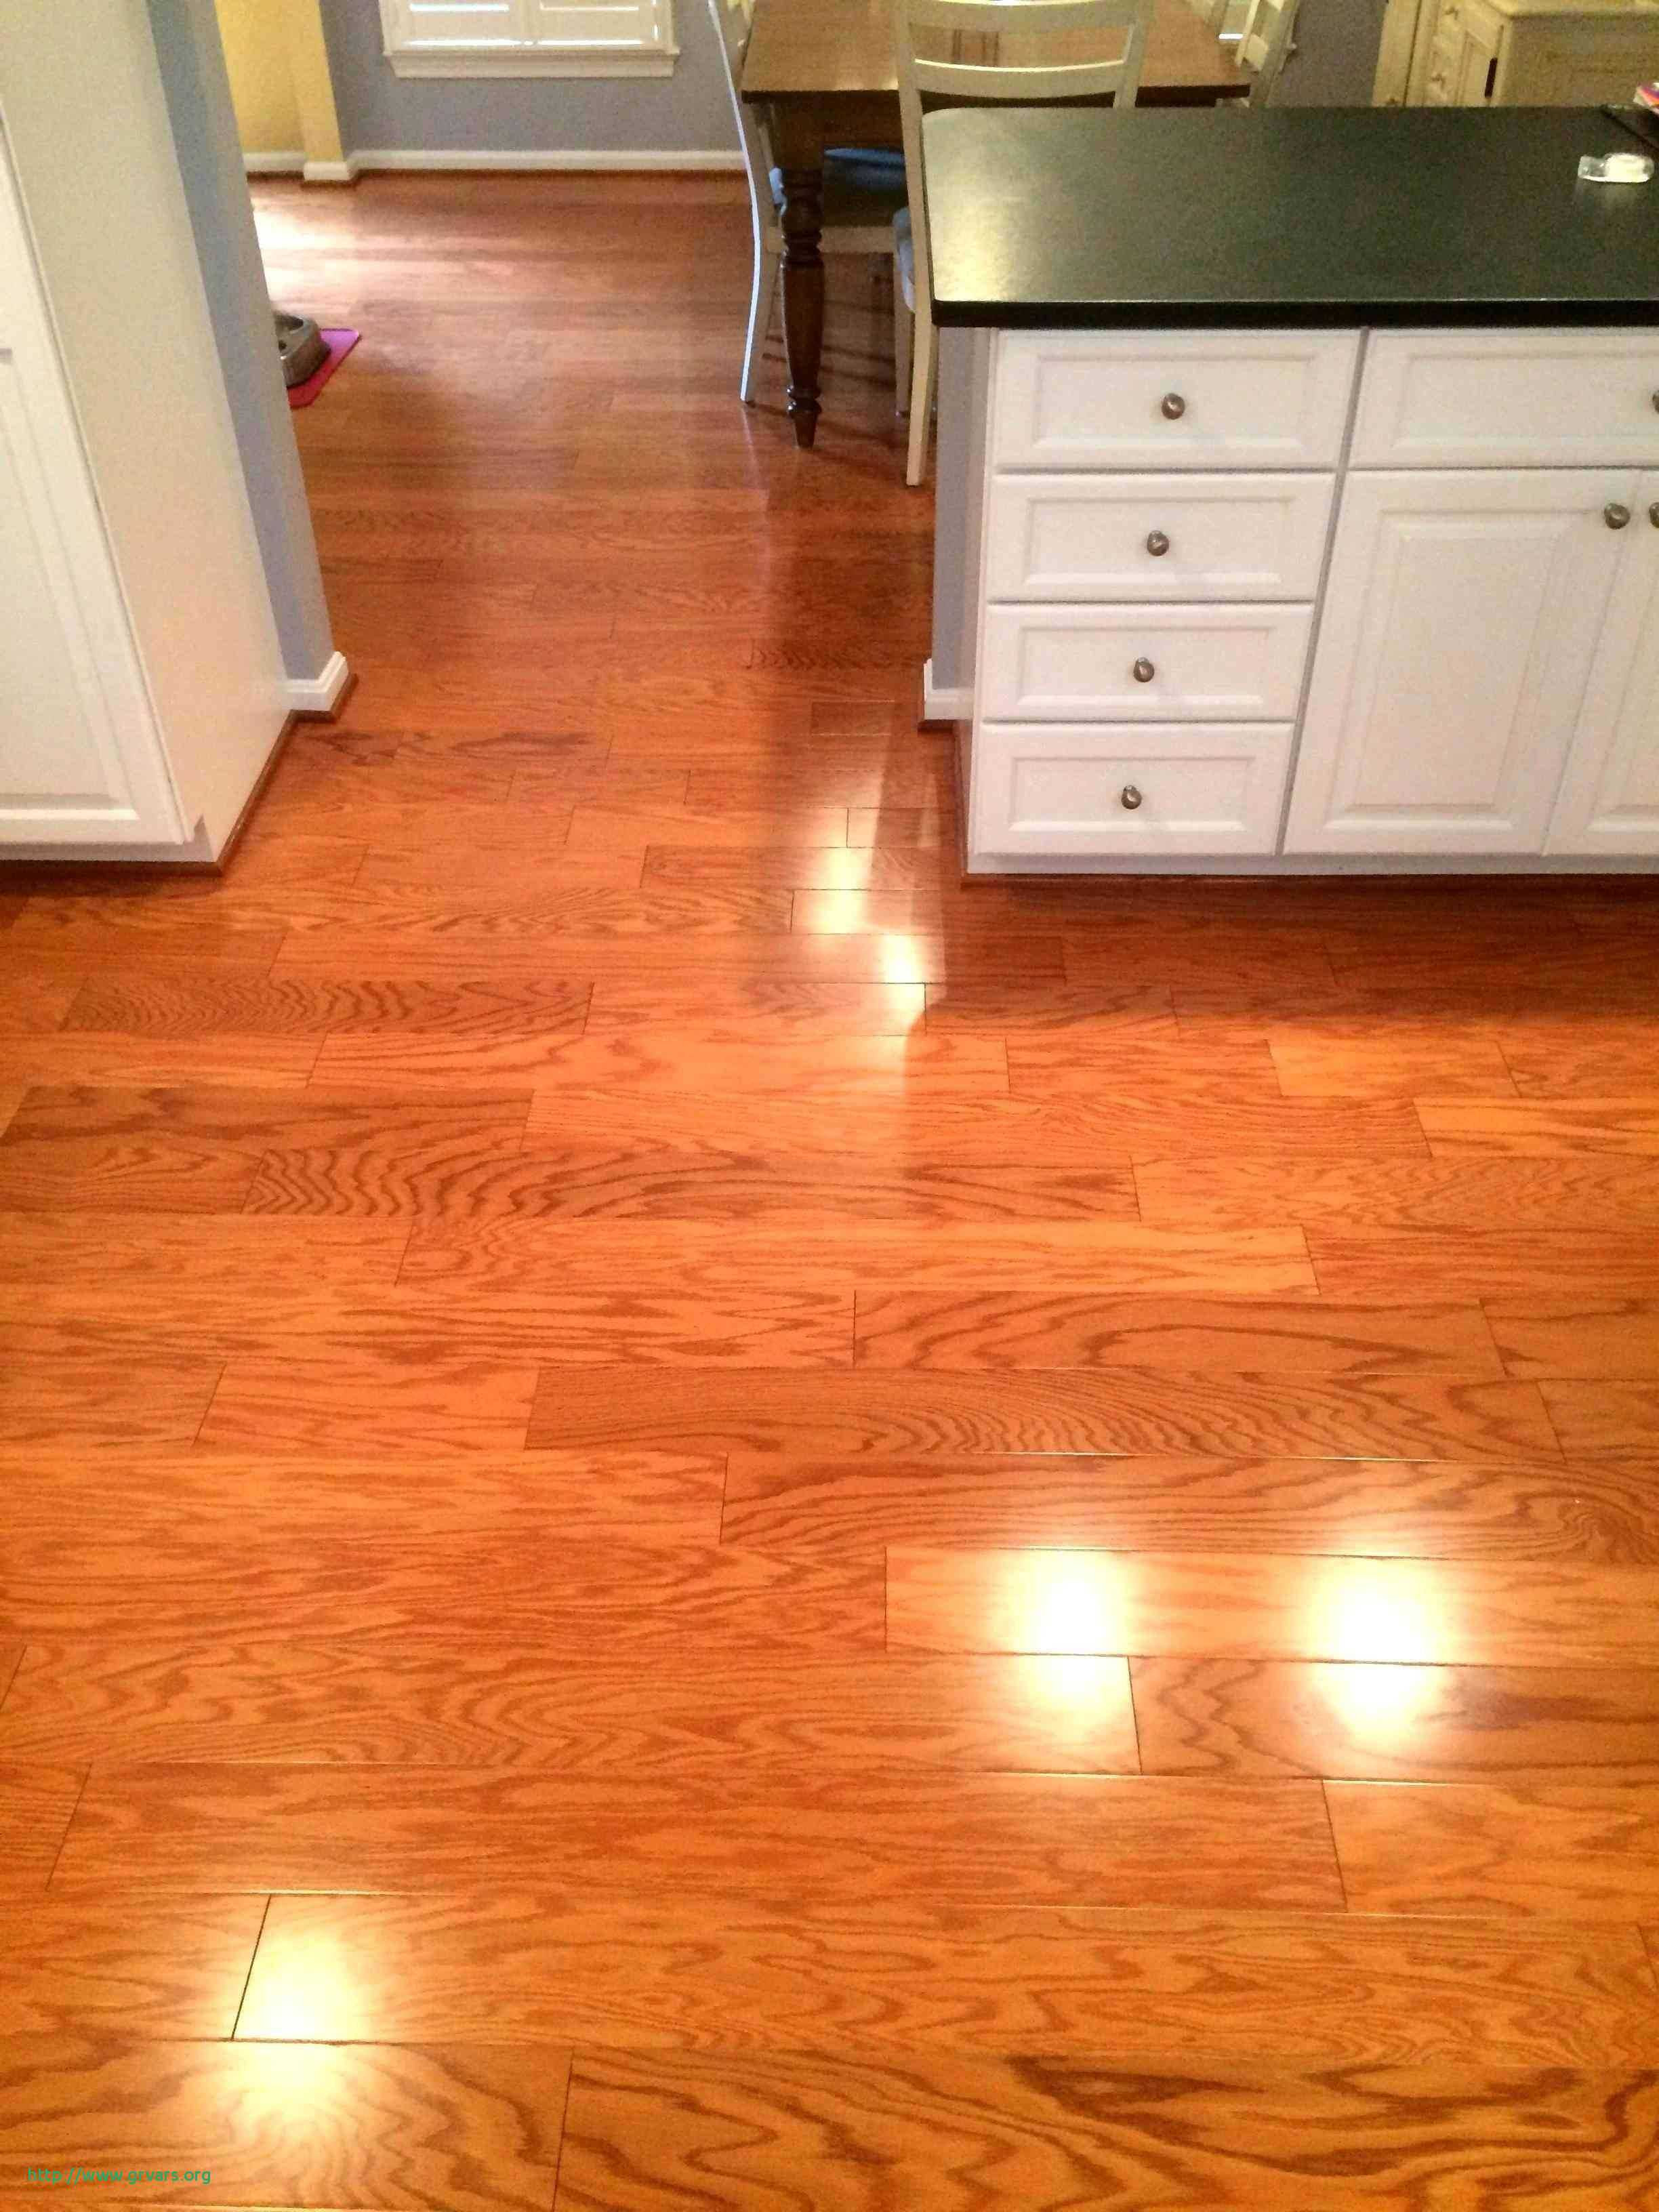 12 attractive No Wax Hardwood Floor Cleaner 2022 free download no wax hardwood floor cleaner of 20 impressionnant where to buy bruce hardwood floor cleaner ideas blog with 20 photos of the 20 impressionnant where to buy bruce hardwood floor cleaner